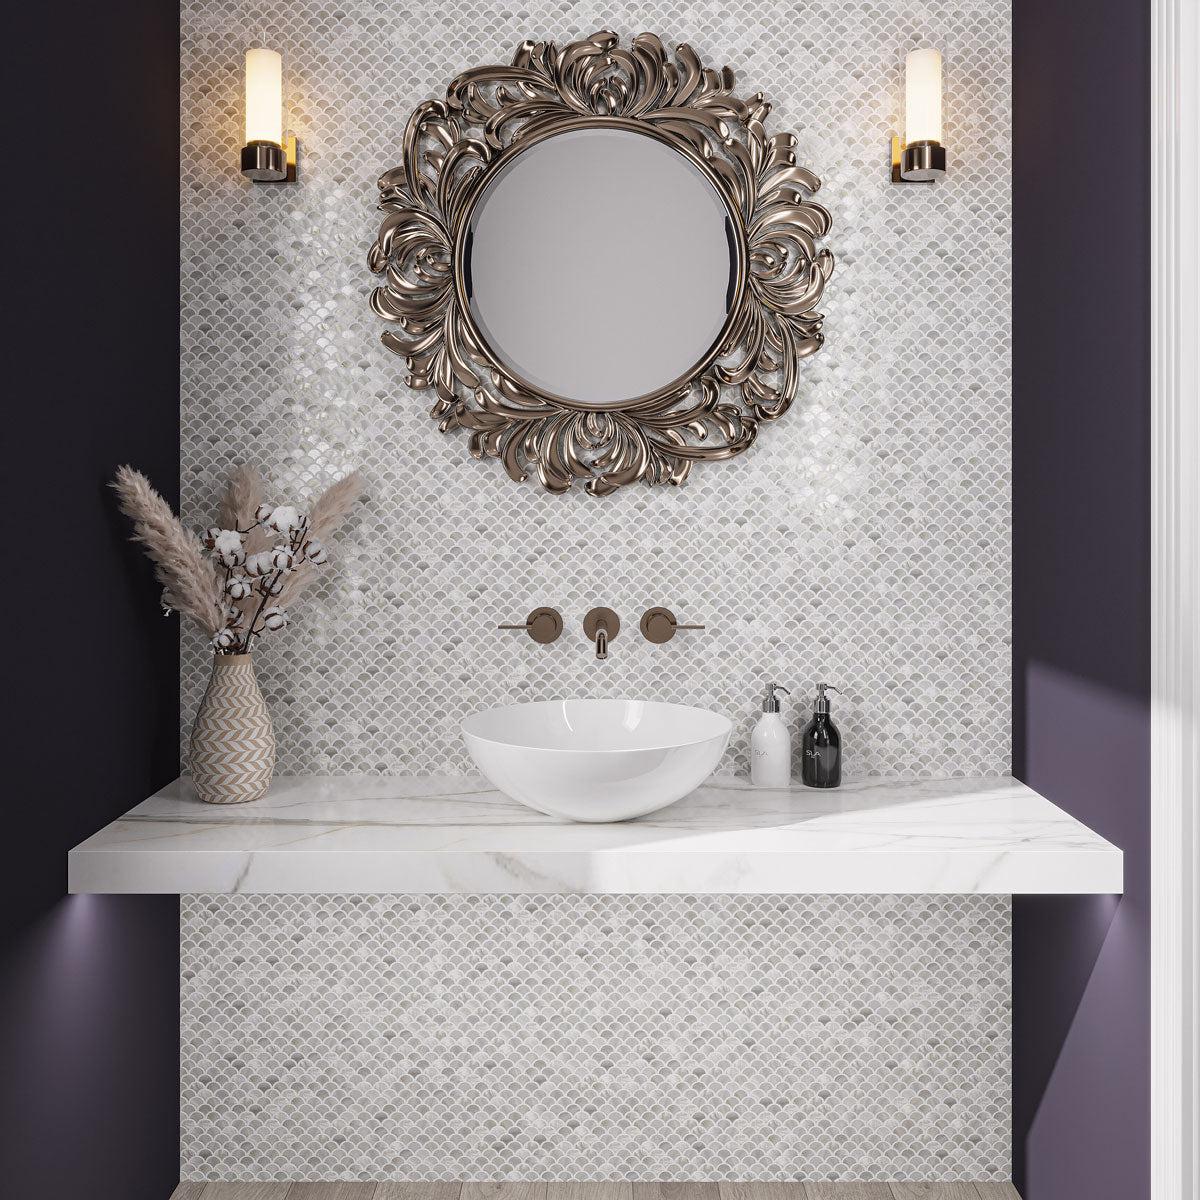 Luxurious Bathroom with Mother of Pearl Scale Tile for a mermaid design with iridescent shells